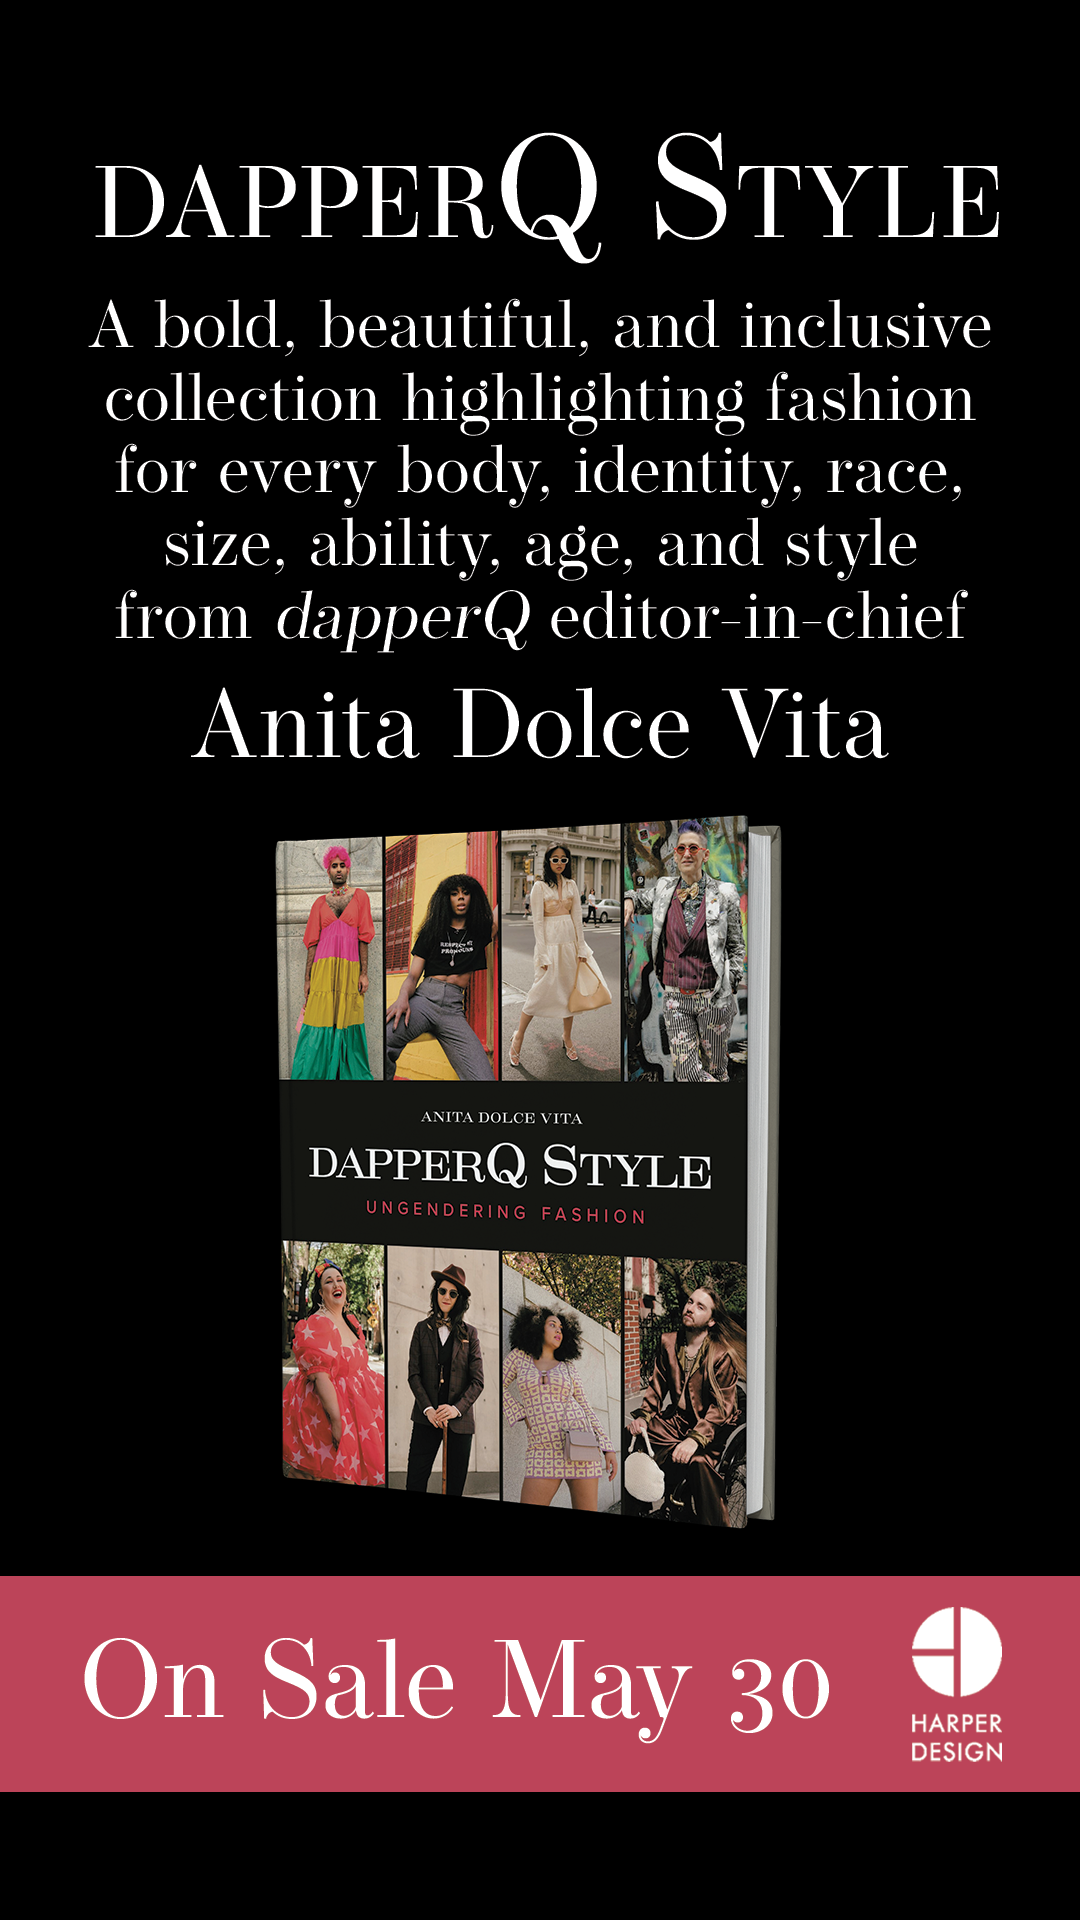 dapperQ | Ungendering Fashion - A bold, beautiful, and inclusive collection highlighting fashion for every body, identity, race, size, ability, age, and style from dapperQ editor-in-chief Anita Dolce Vita - On Sale May 30 - Harper Design